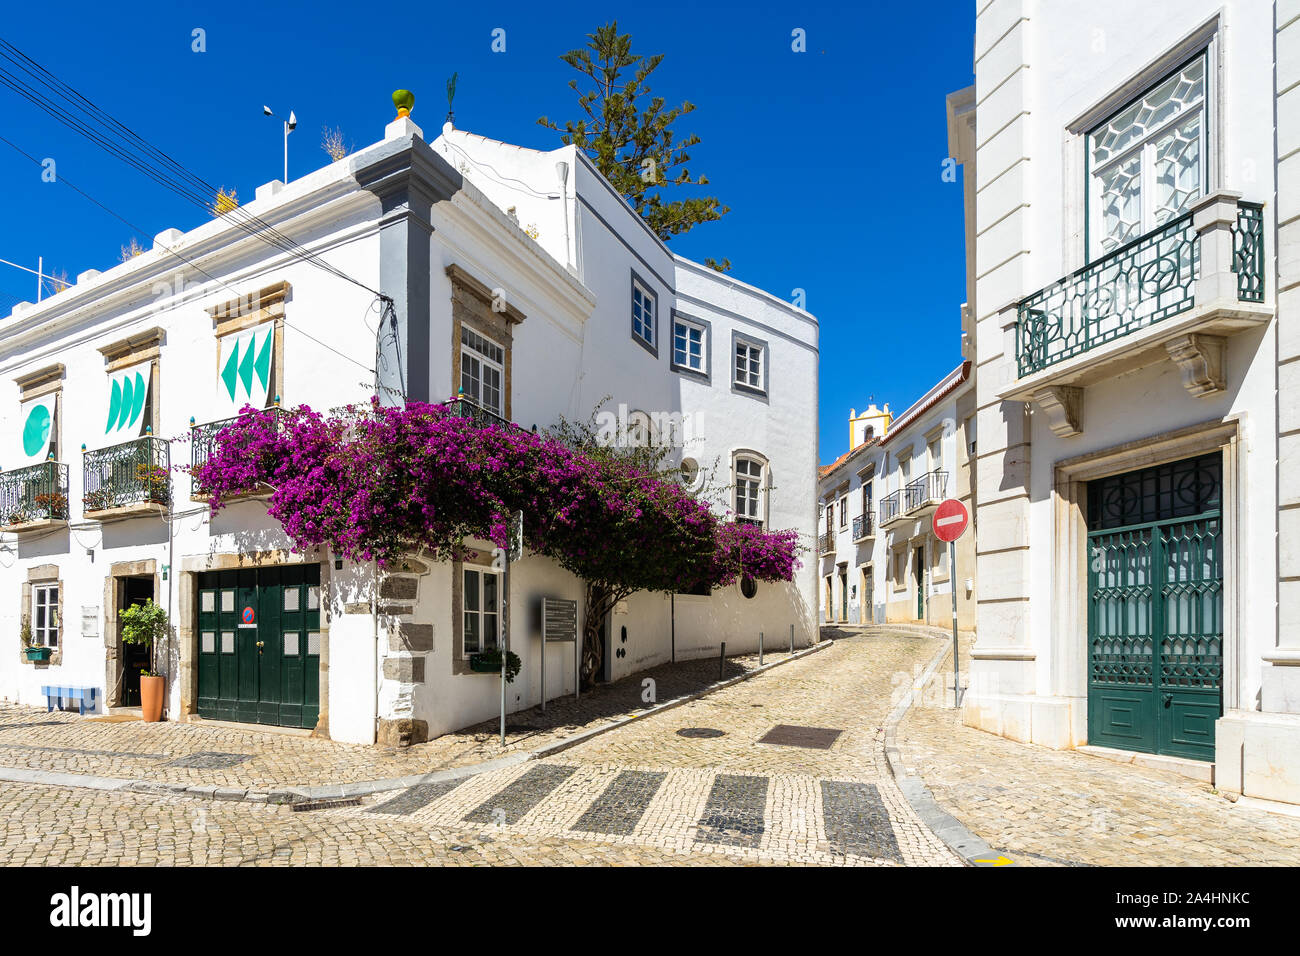 A picturesque street in Tavira with whitewashed houses decorated with bougainvillea flower,  Algarve, Portugal Stock Photo